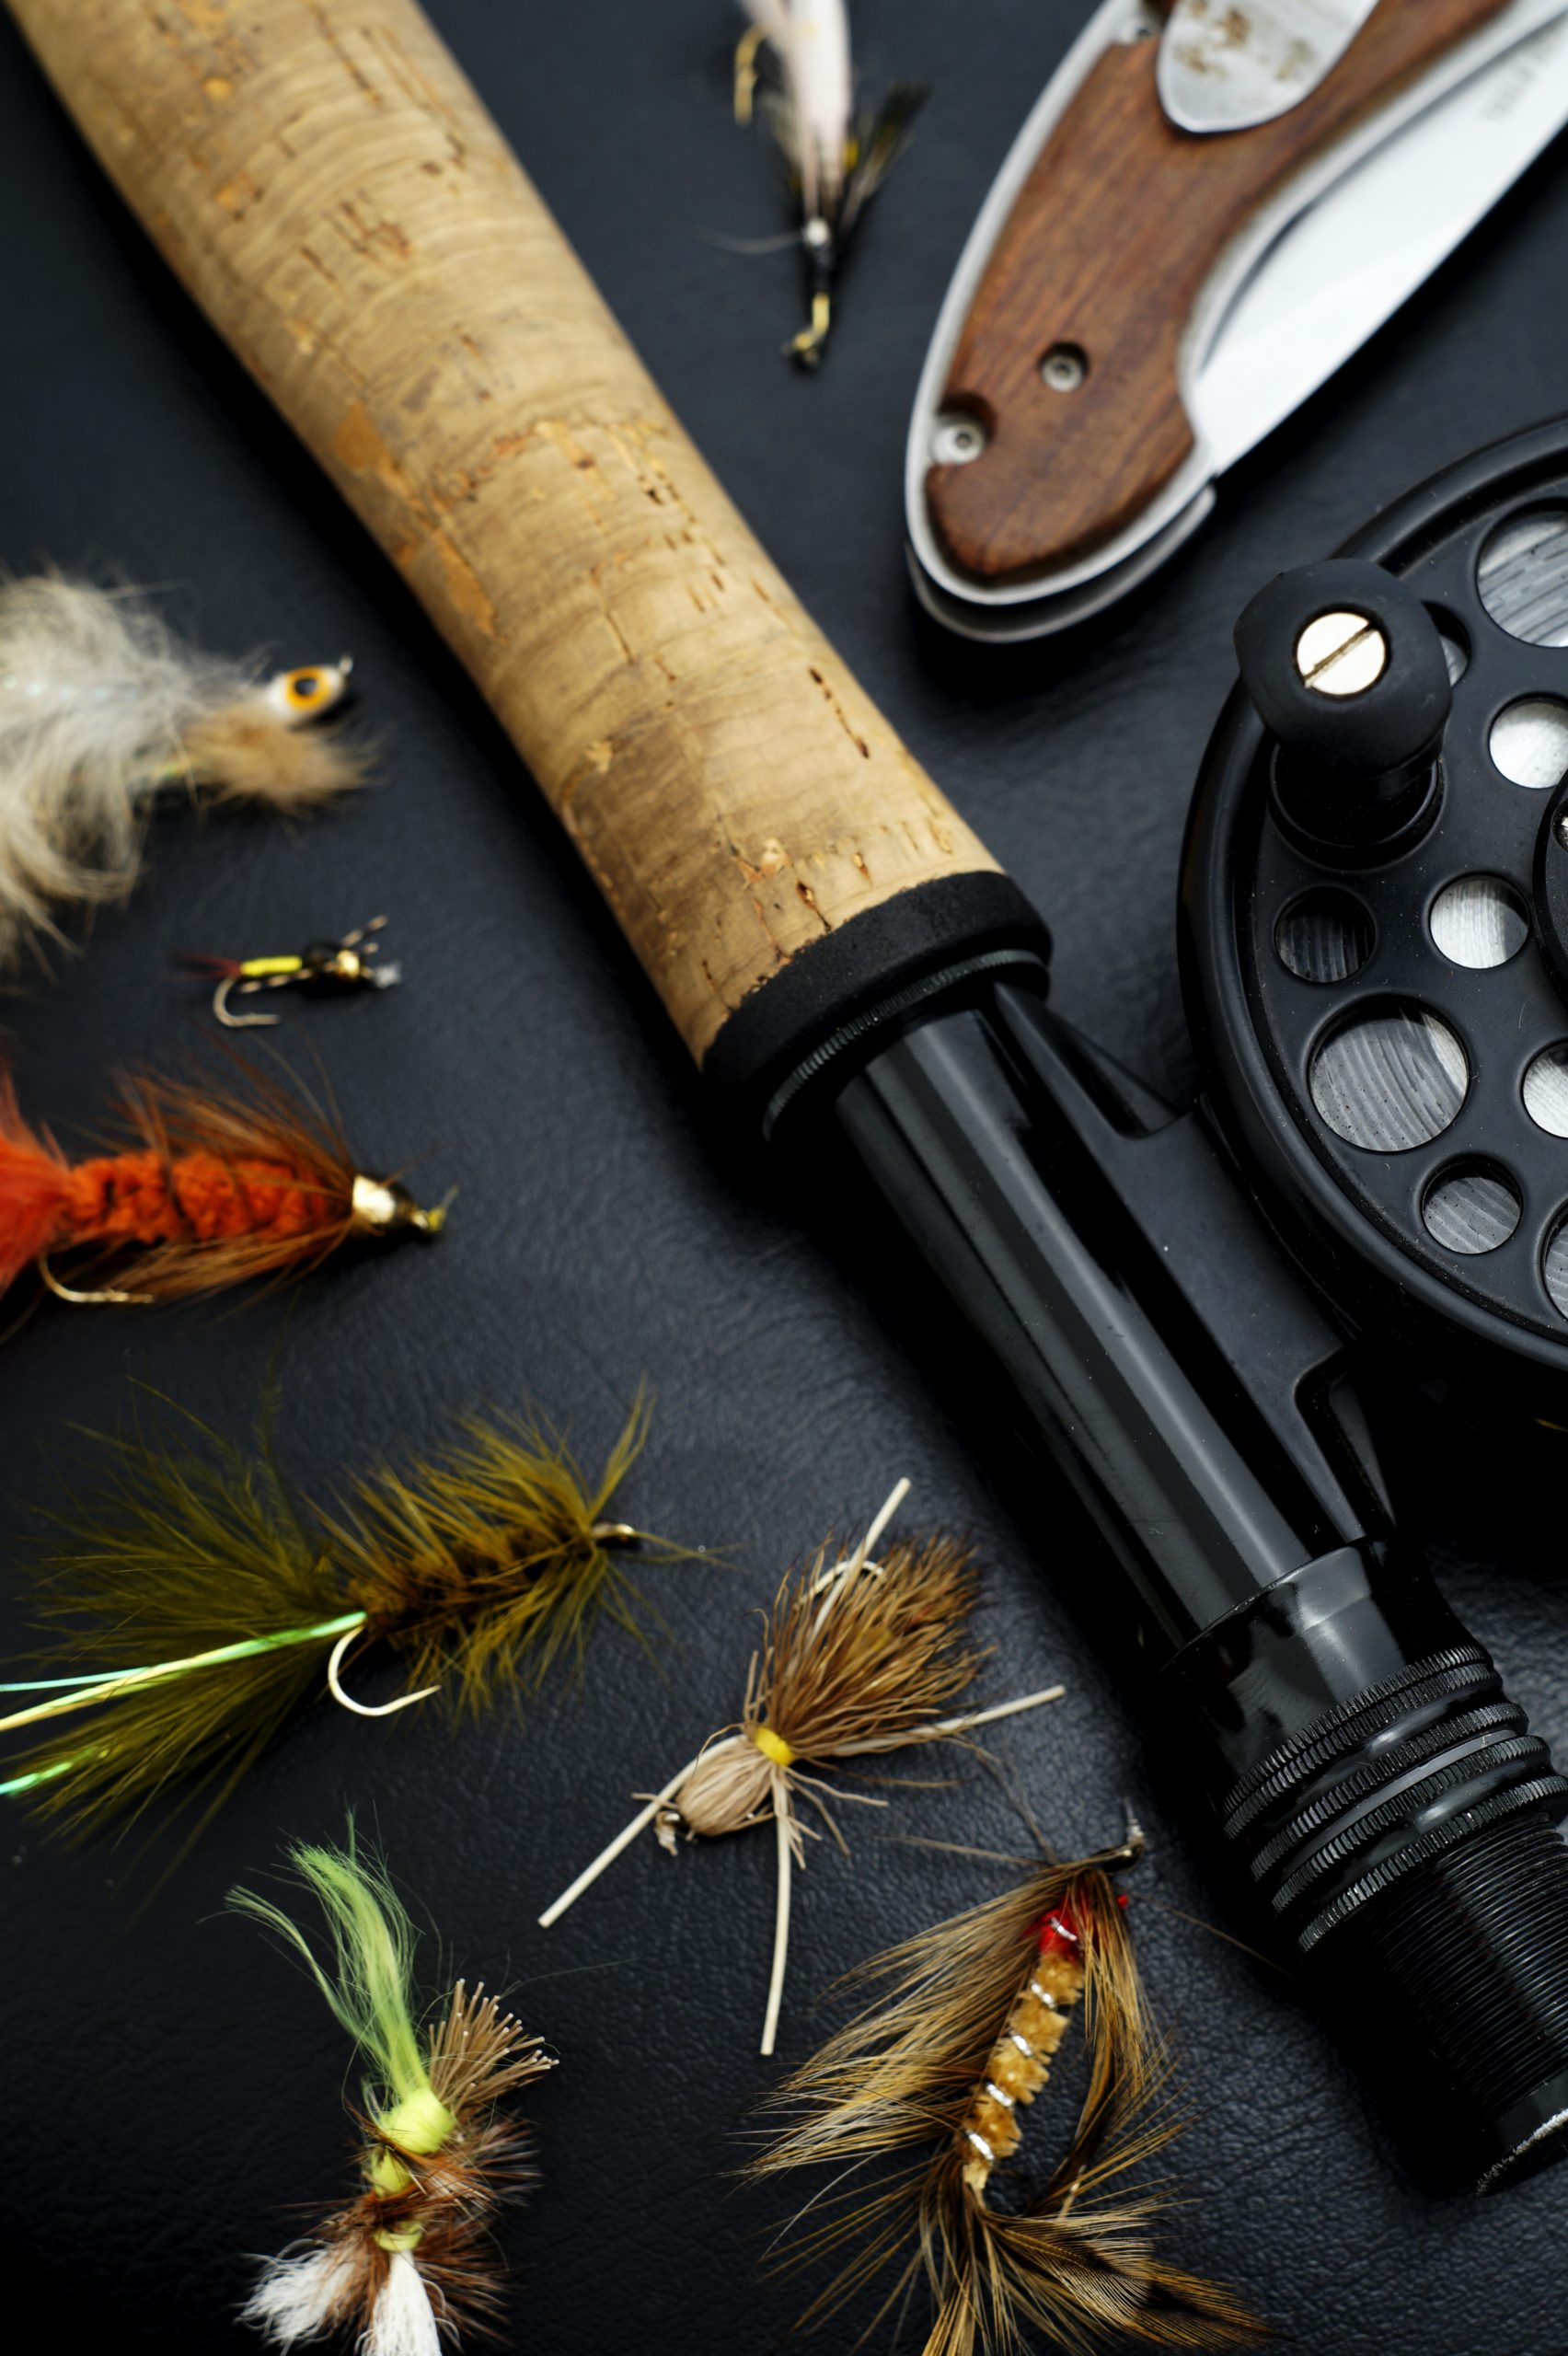 Land Big Fish By Upgrading Your Fishing Equipment — The Fishing Advice